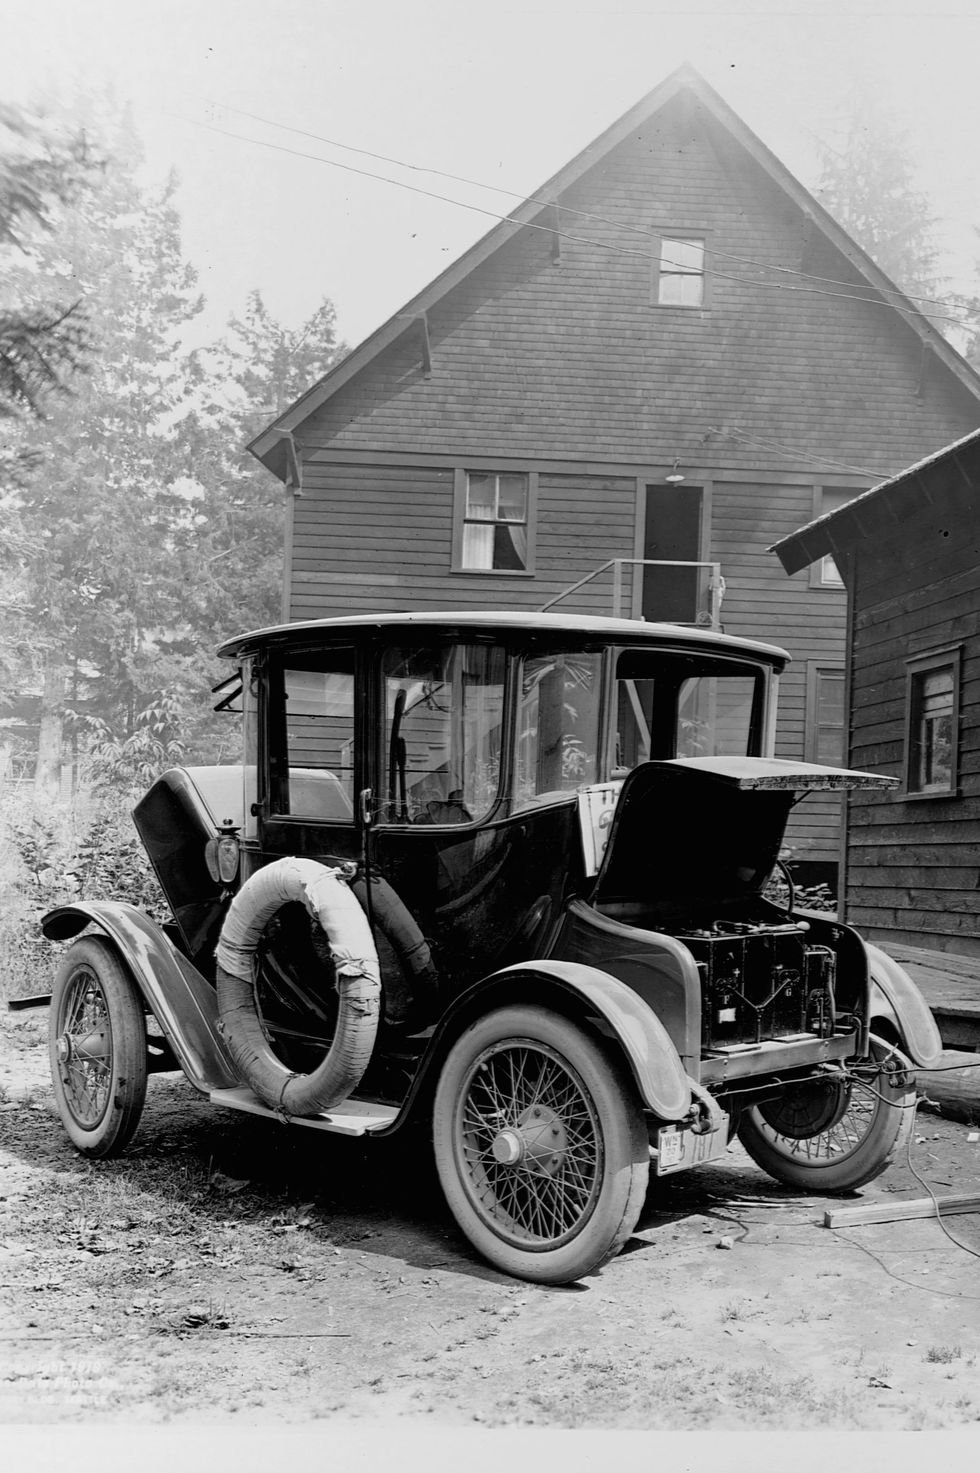 most popular car the year you were born, history of cars, motor vehicle, vintage car, vehicle, car, classic, antique car, classic car, ford motor company, ford model a,